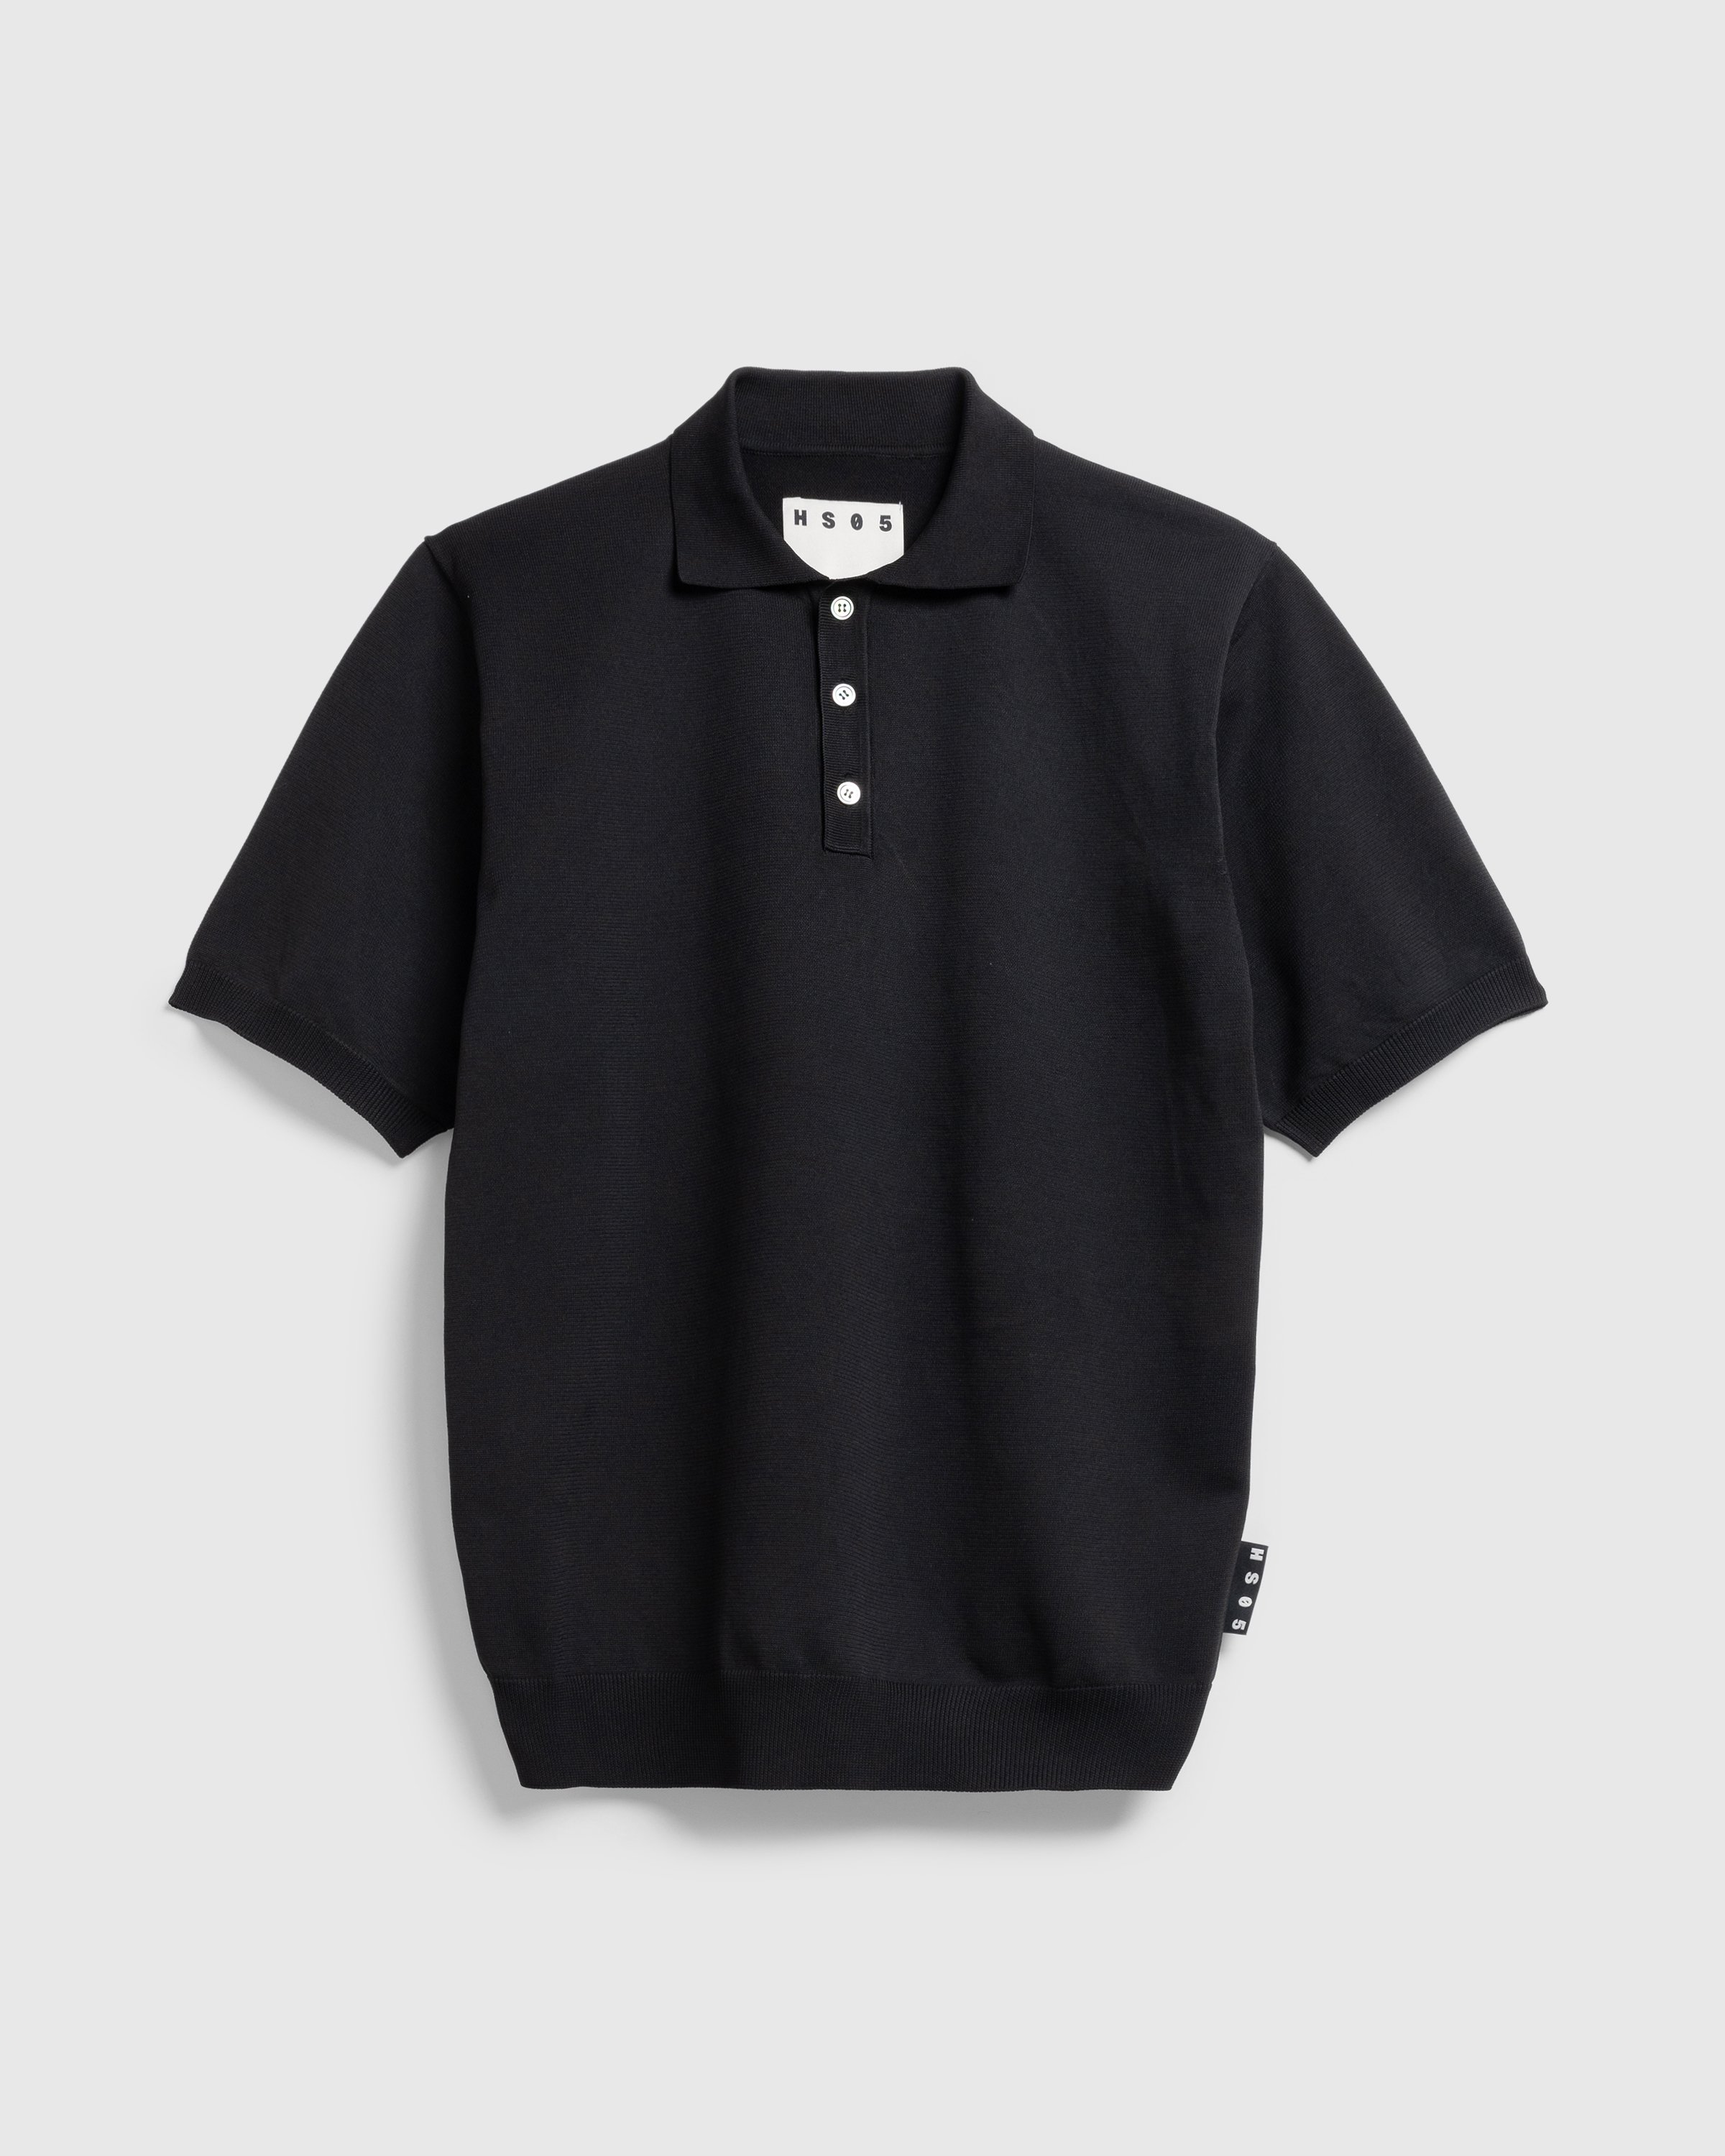 Highsnobiety HS05 - Poly SS Knit Polo - Clothing - Black - Image 1